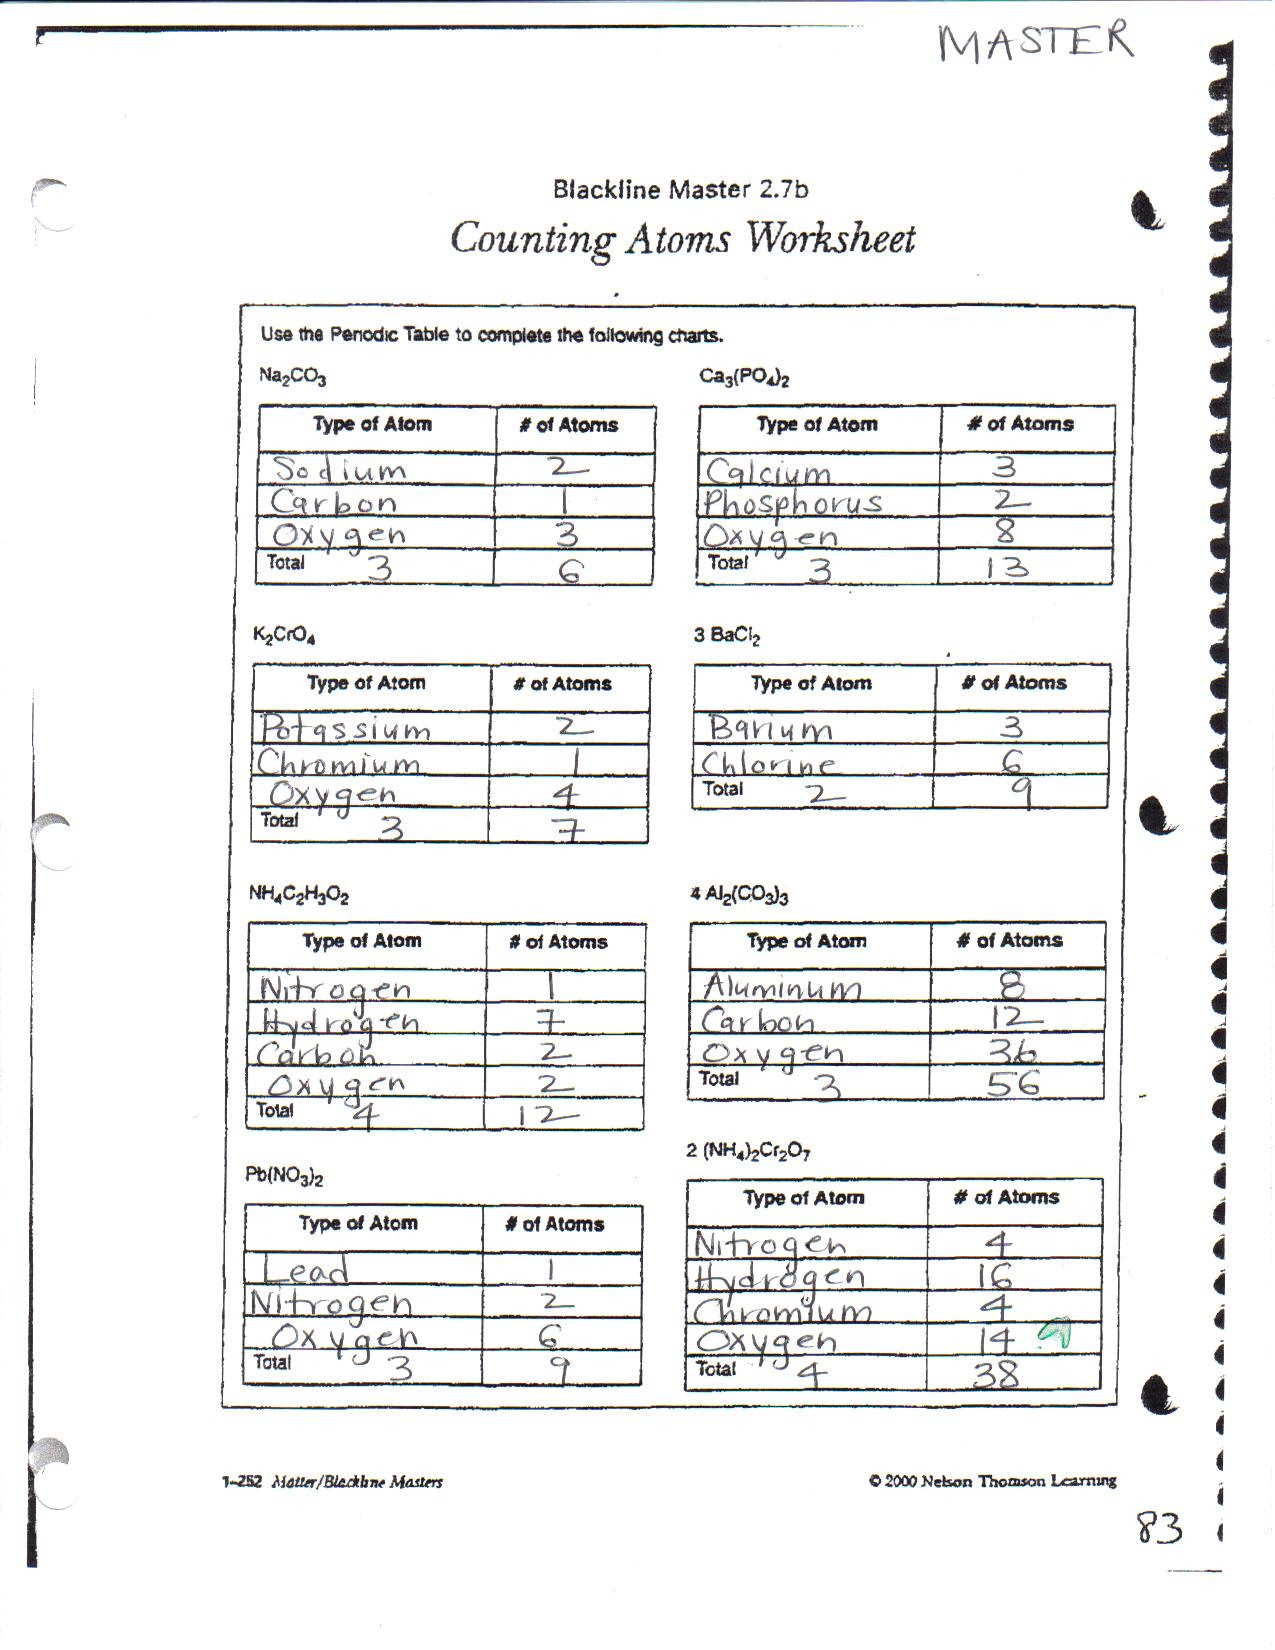 Counting Atoms Worksheet Answers Db excel